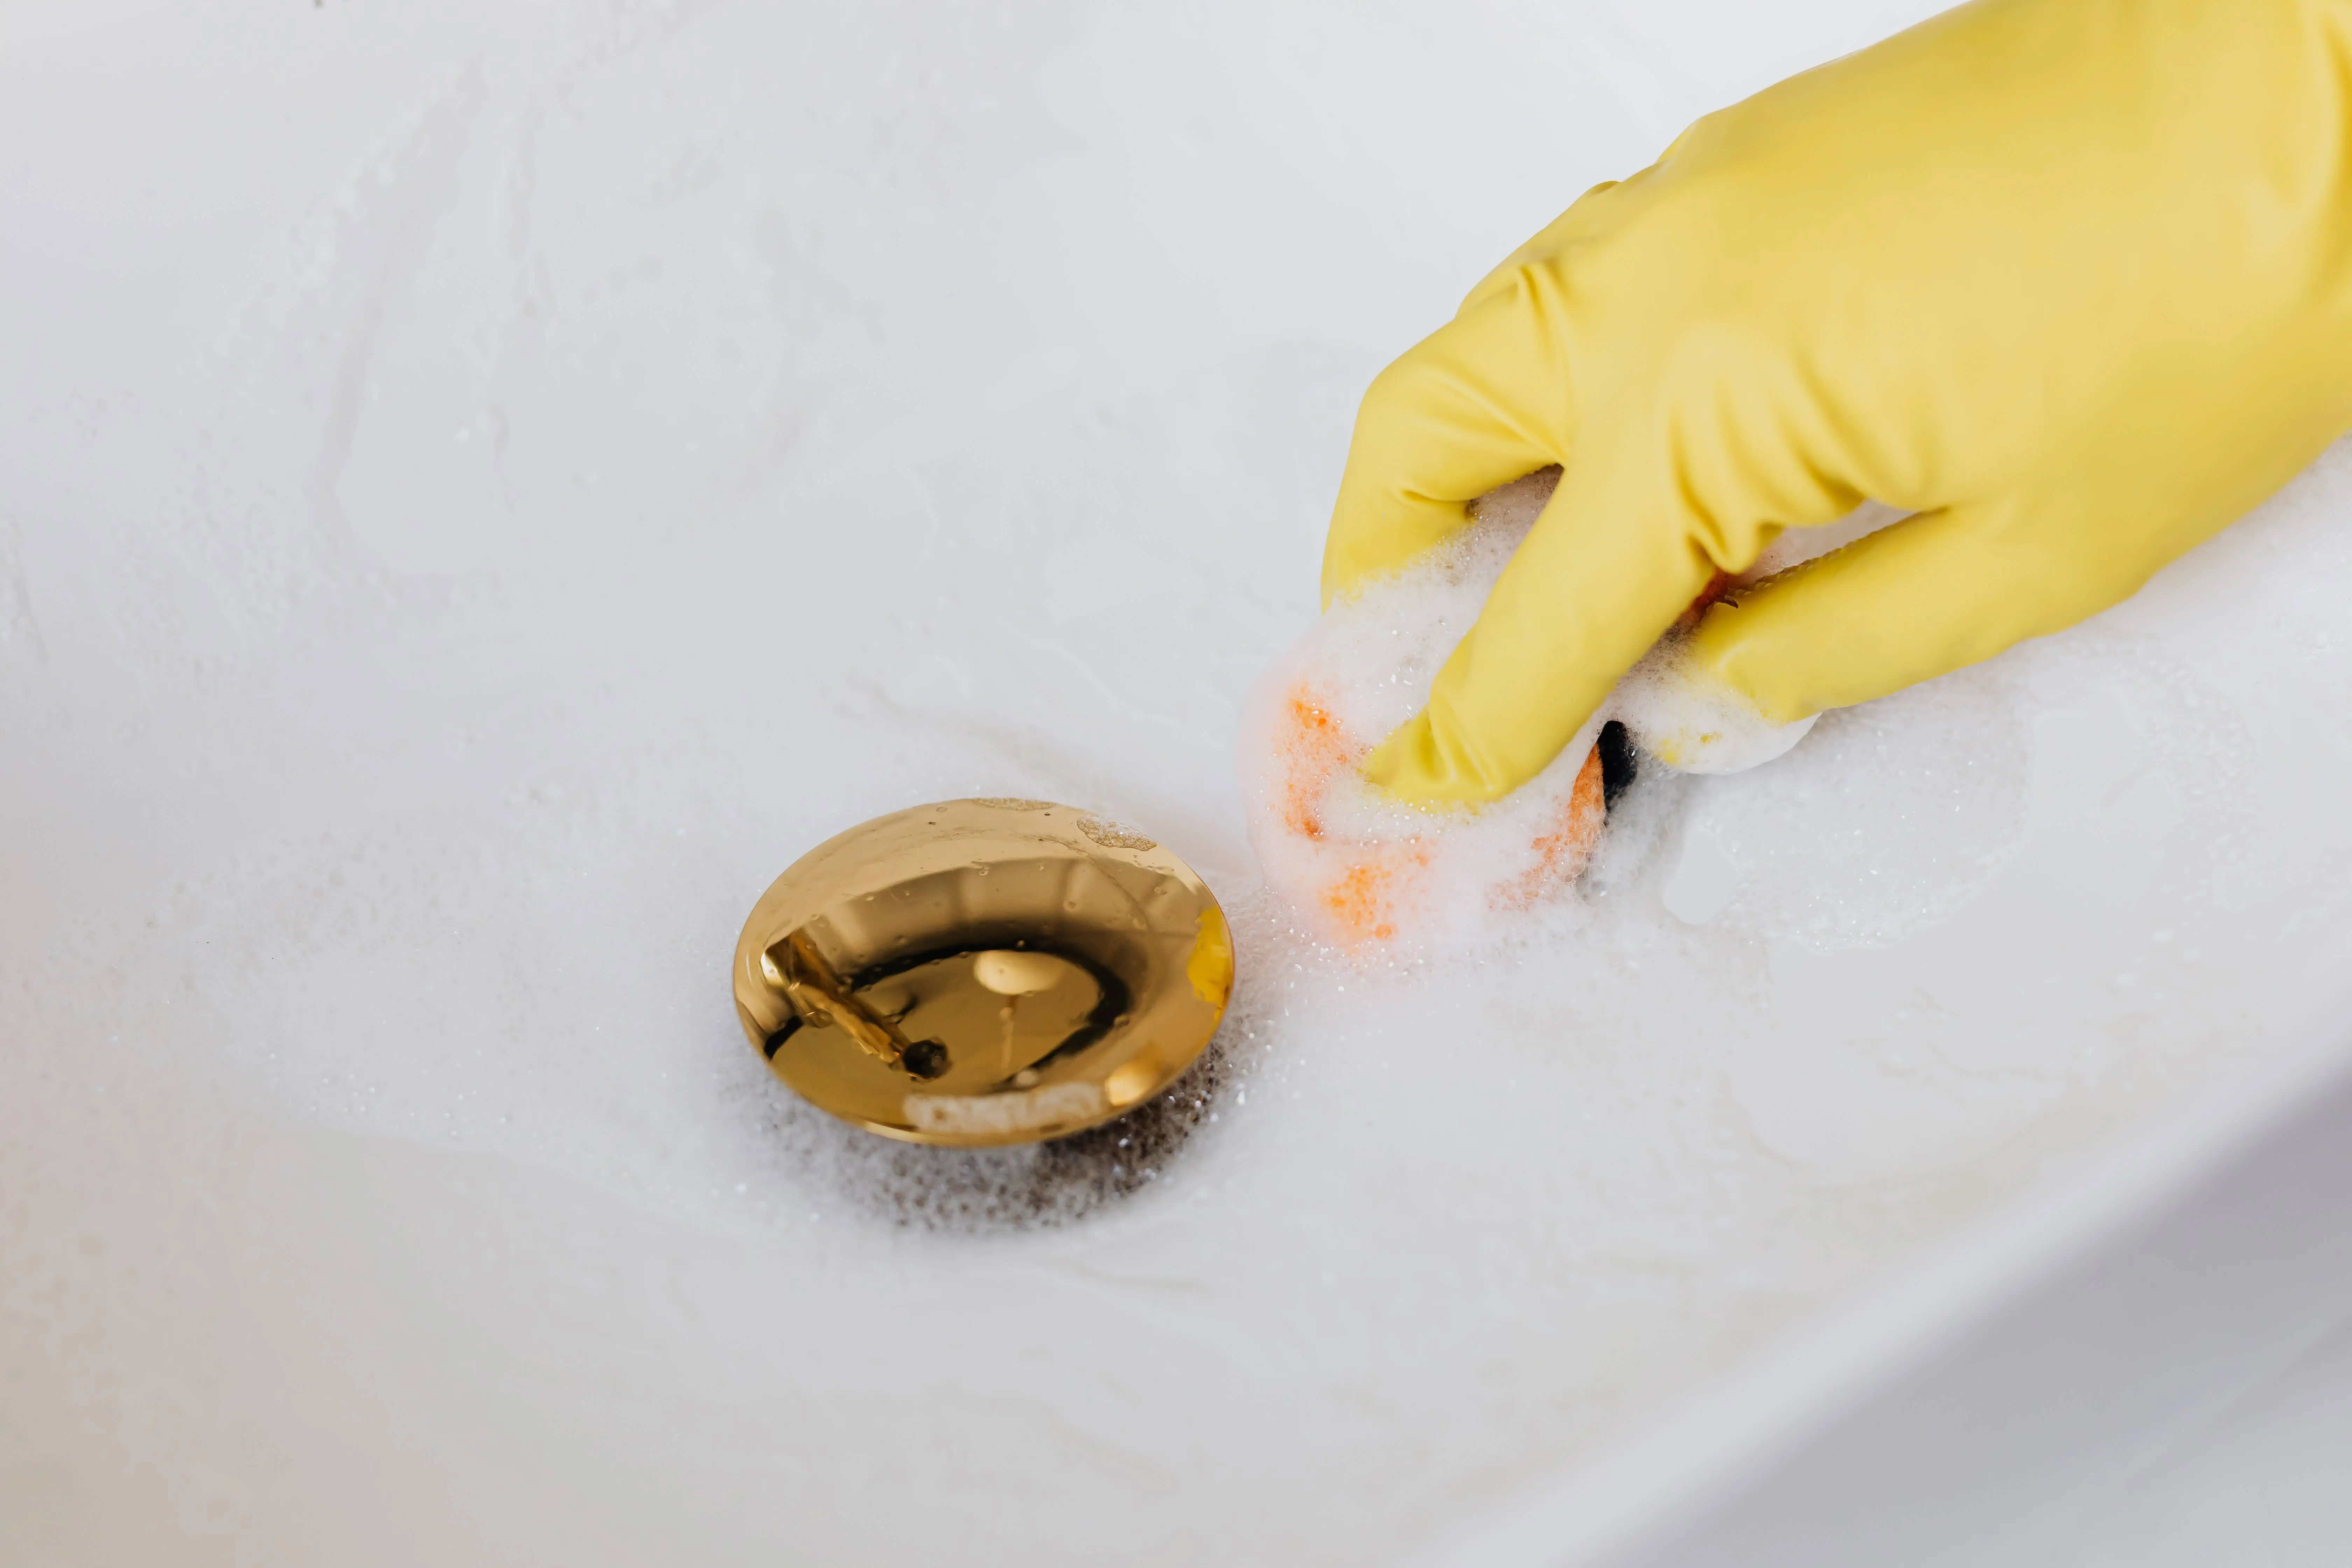 Hand in a glove holding a sponge cleaning a drain